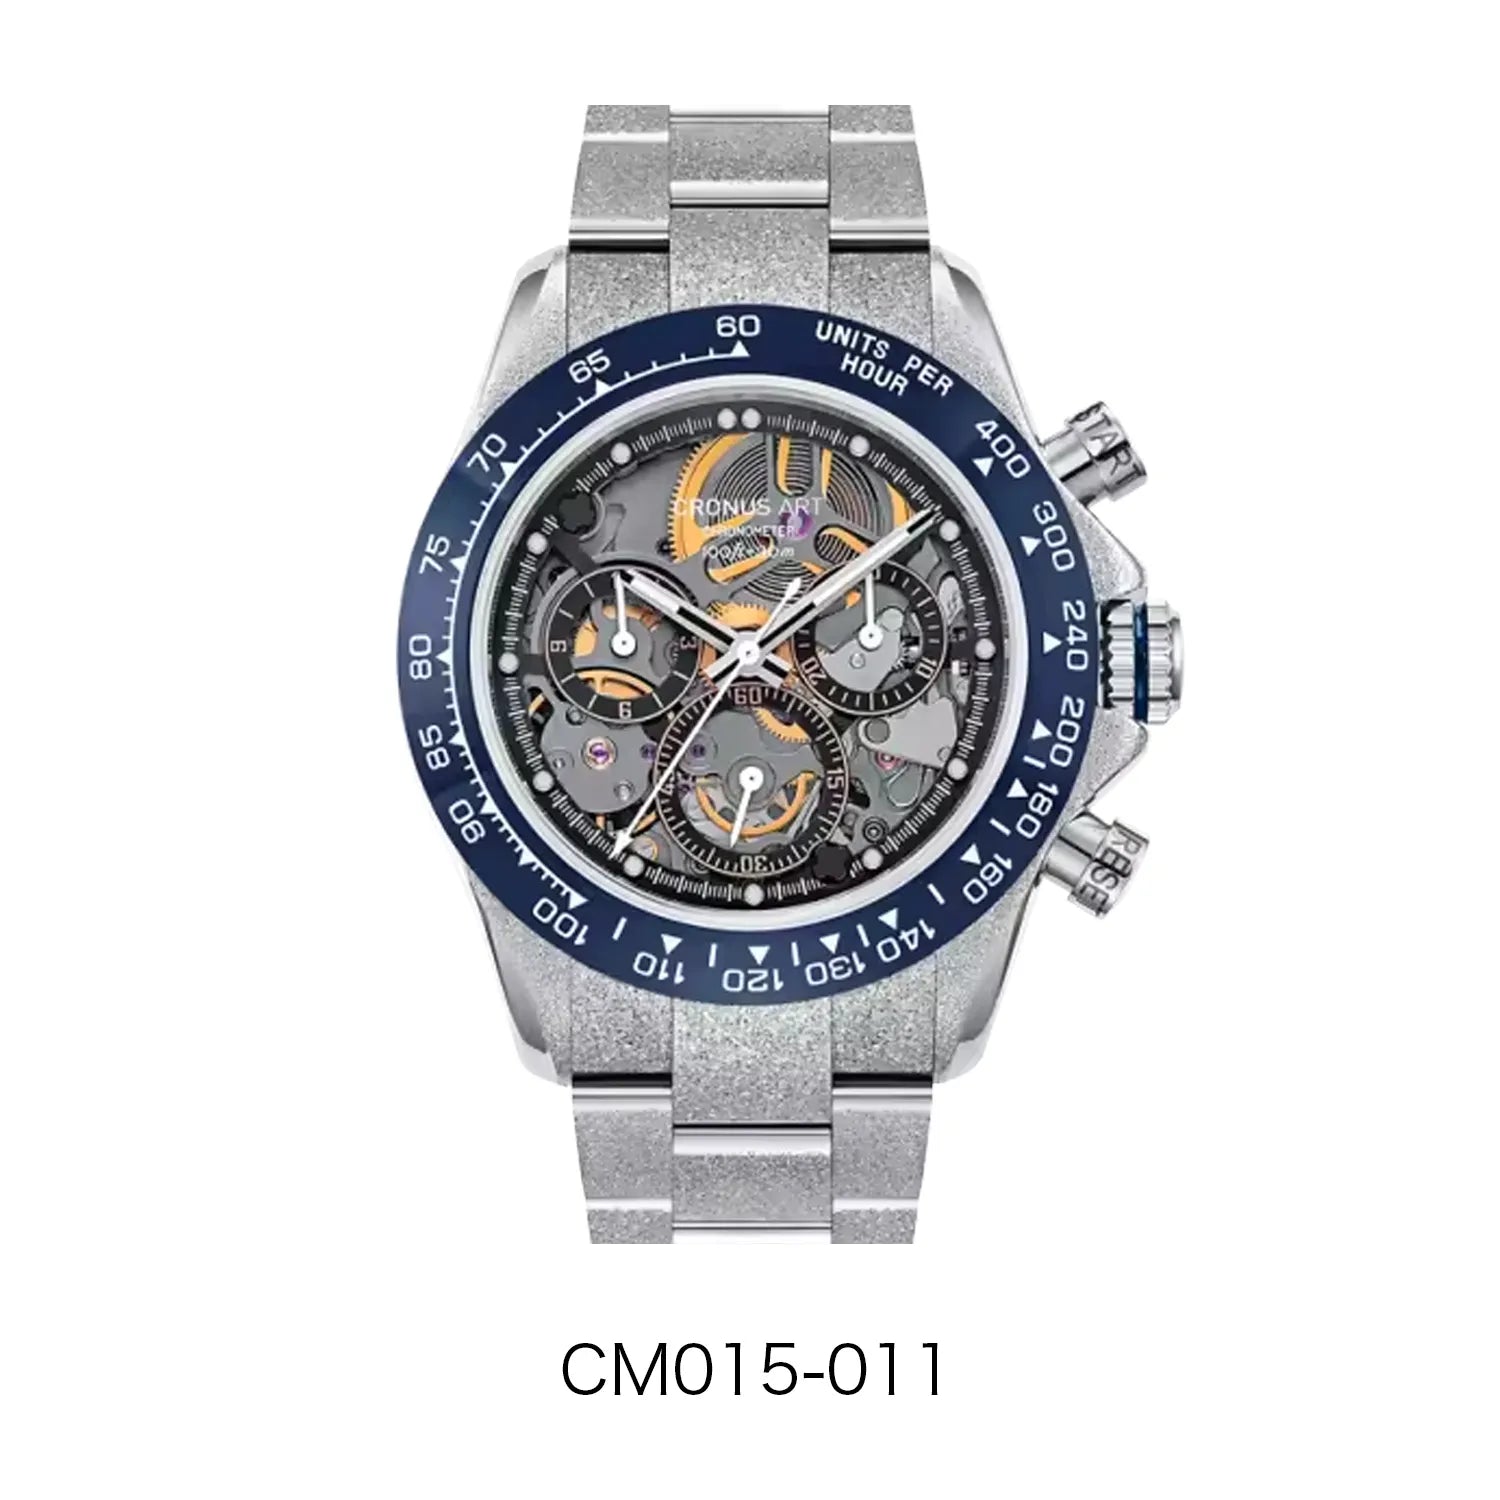 Luxury 40mm Stainless Steel Automatic Watch with Sapphire Glass | 2-Year Warranty Included